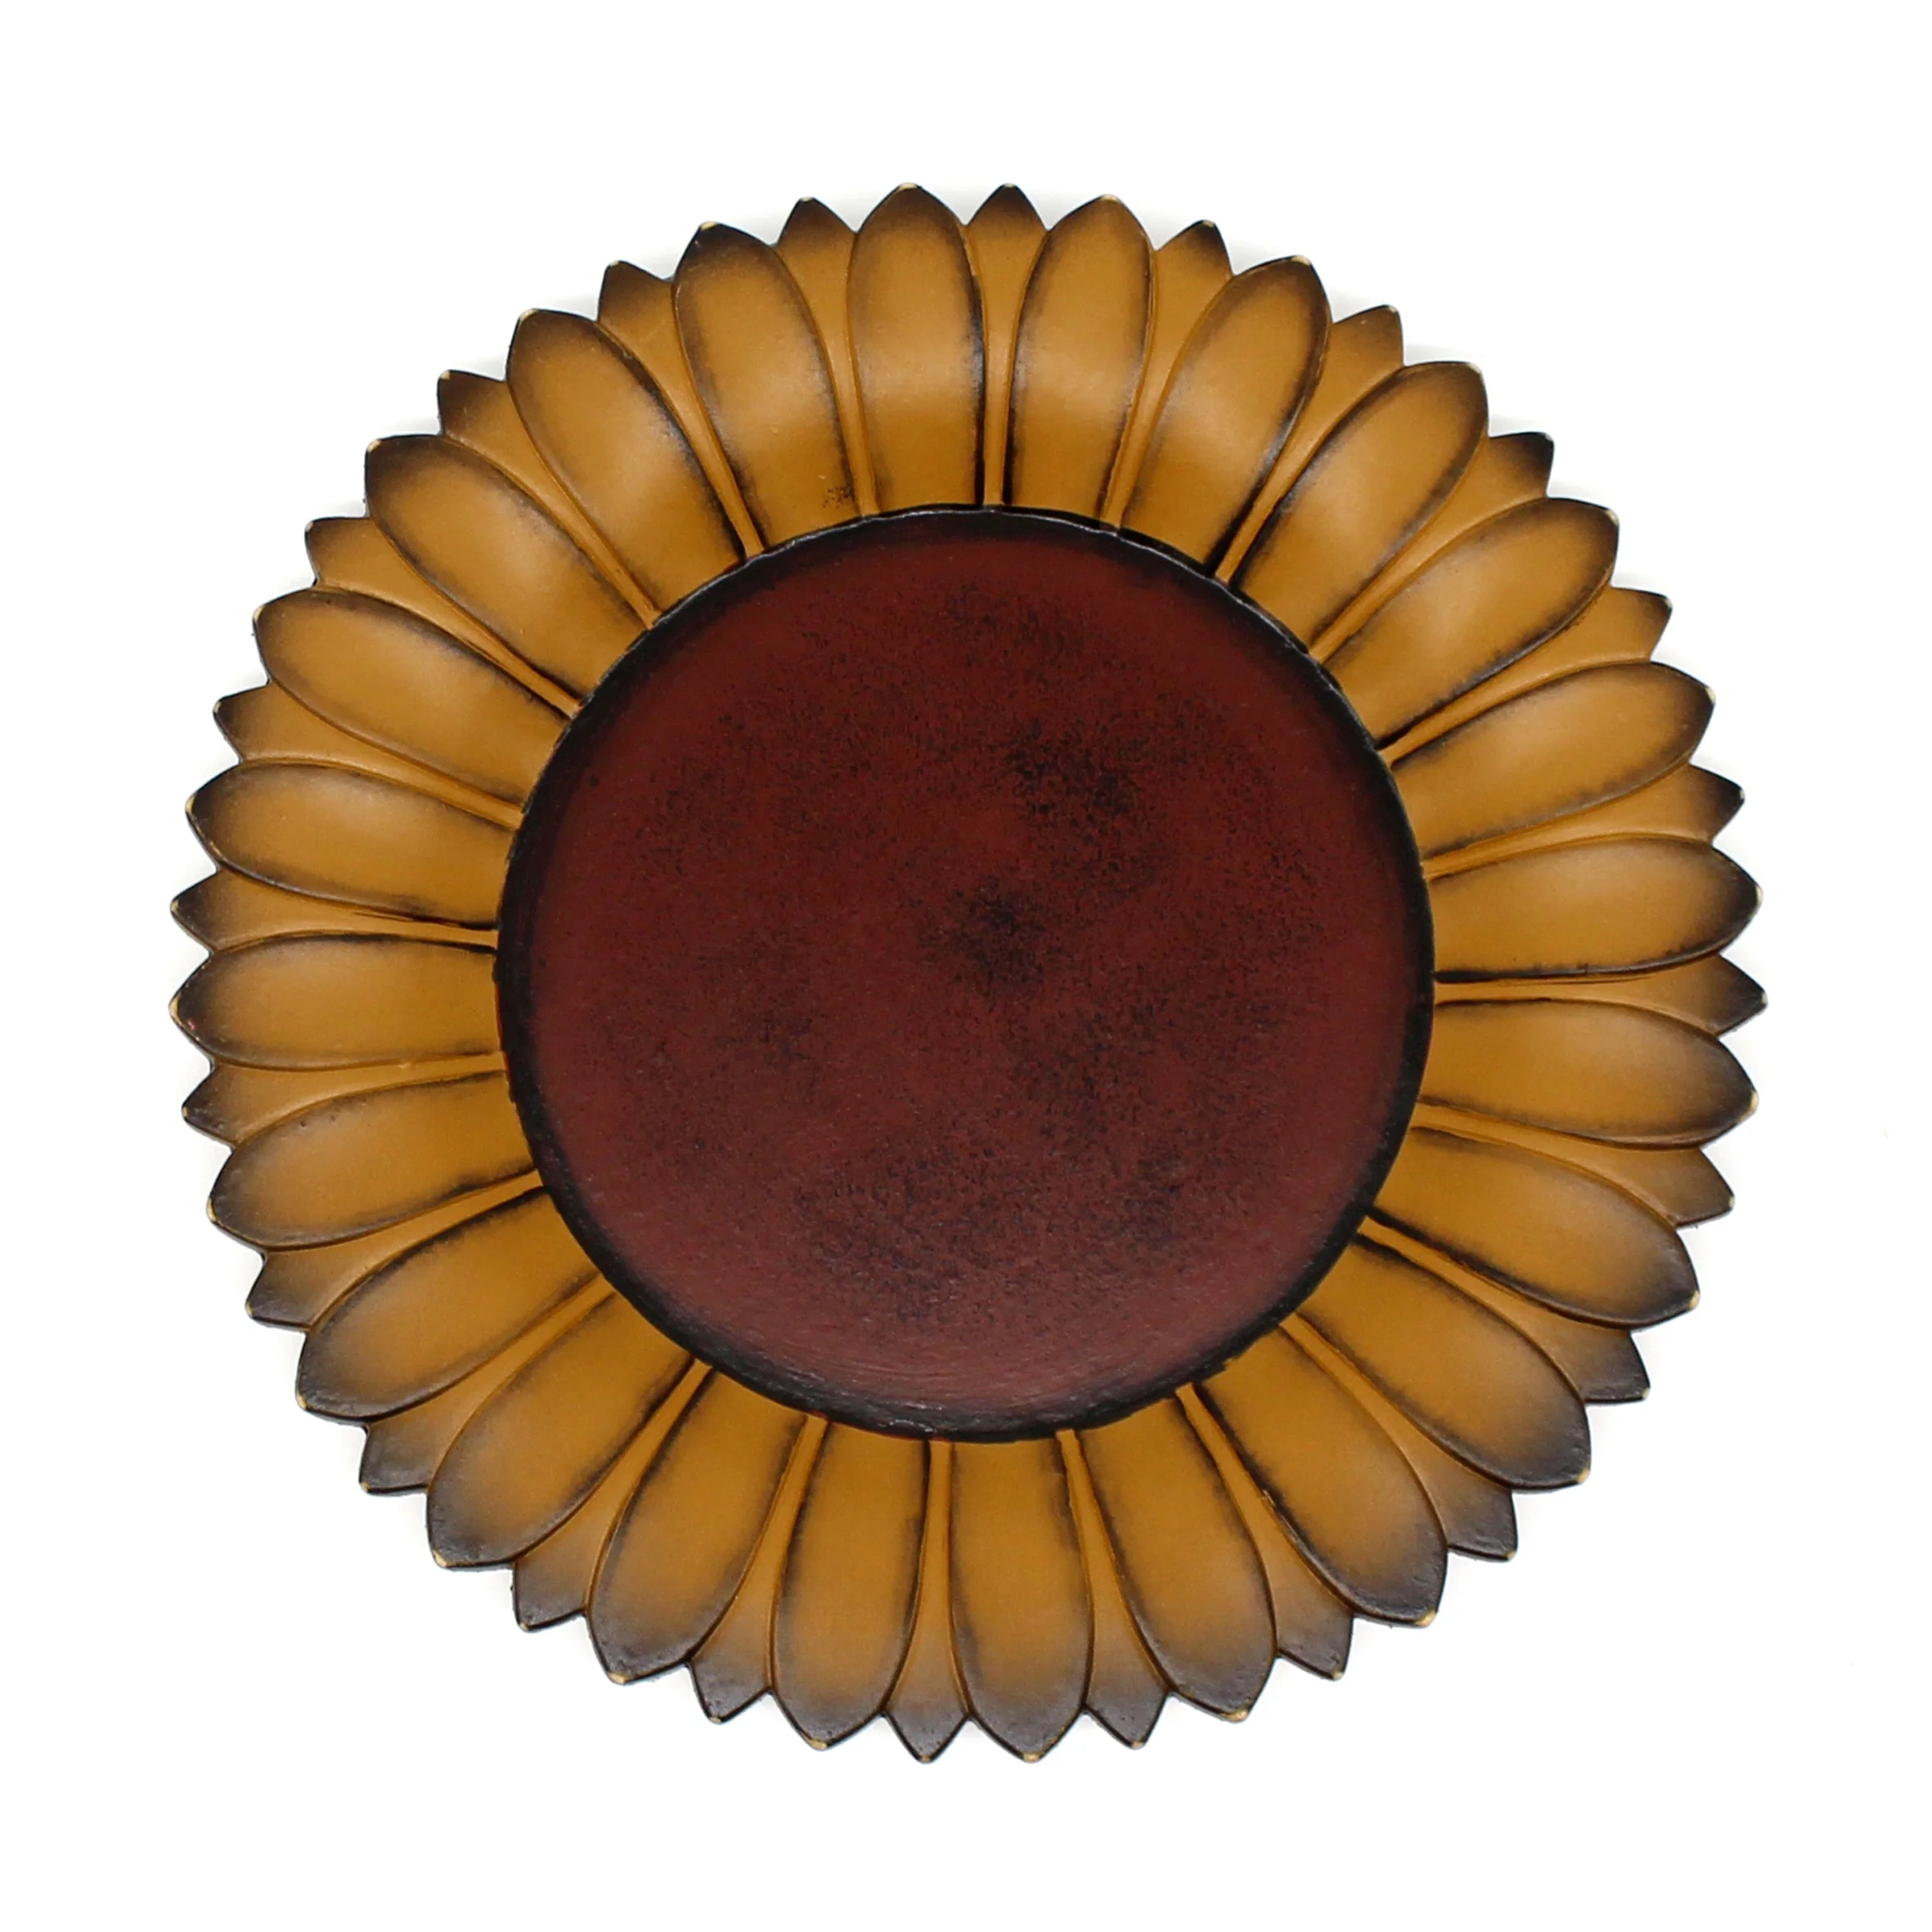 

Sunflower Plate with Rack Primitives Rustic Display Wooden Plate Home and Office Decor Art, 11 Inch